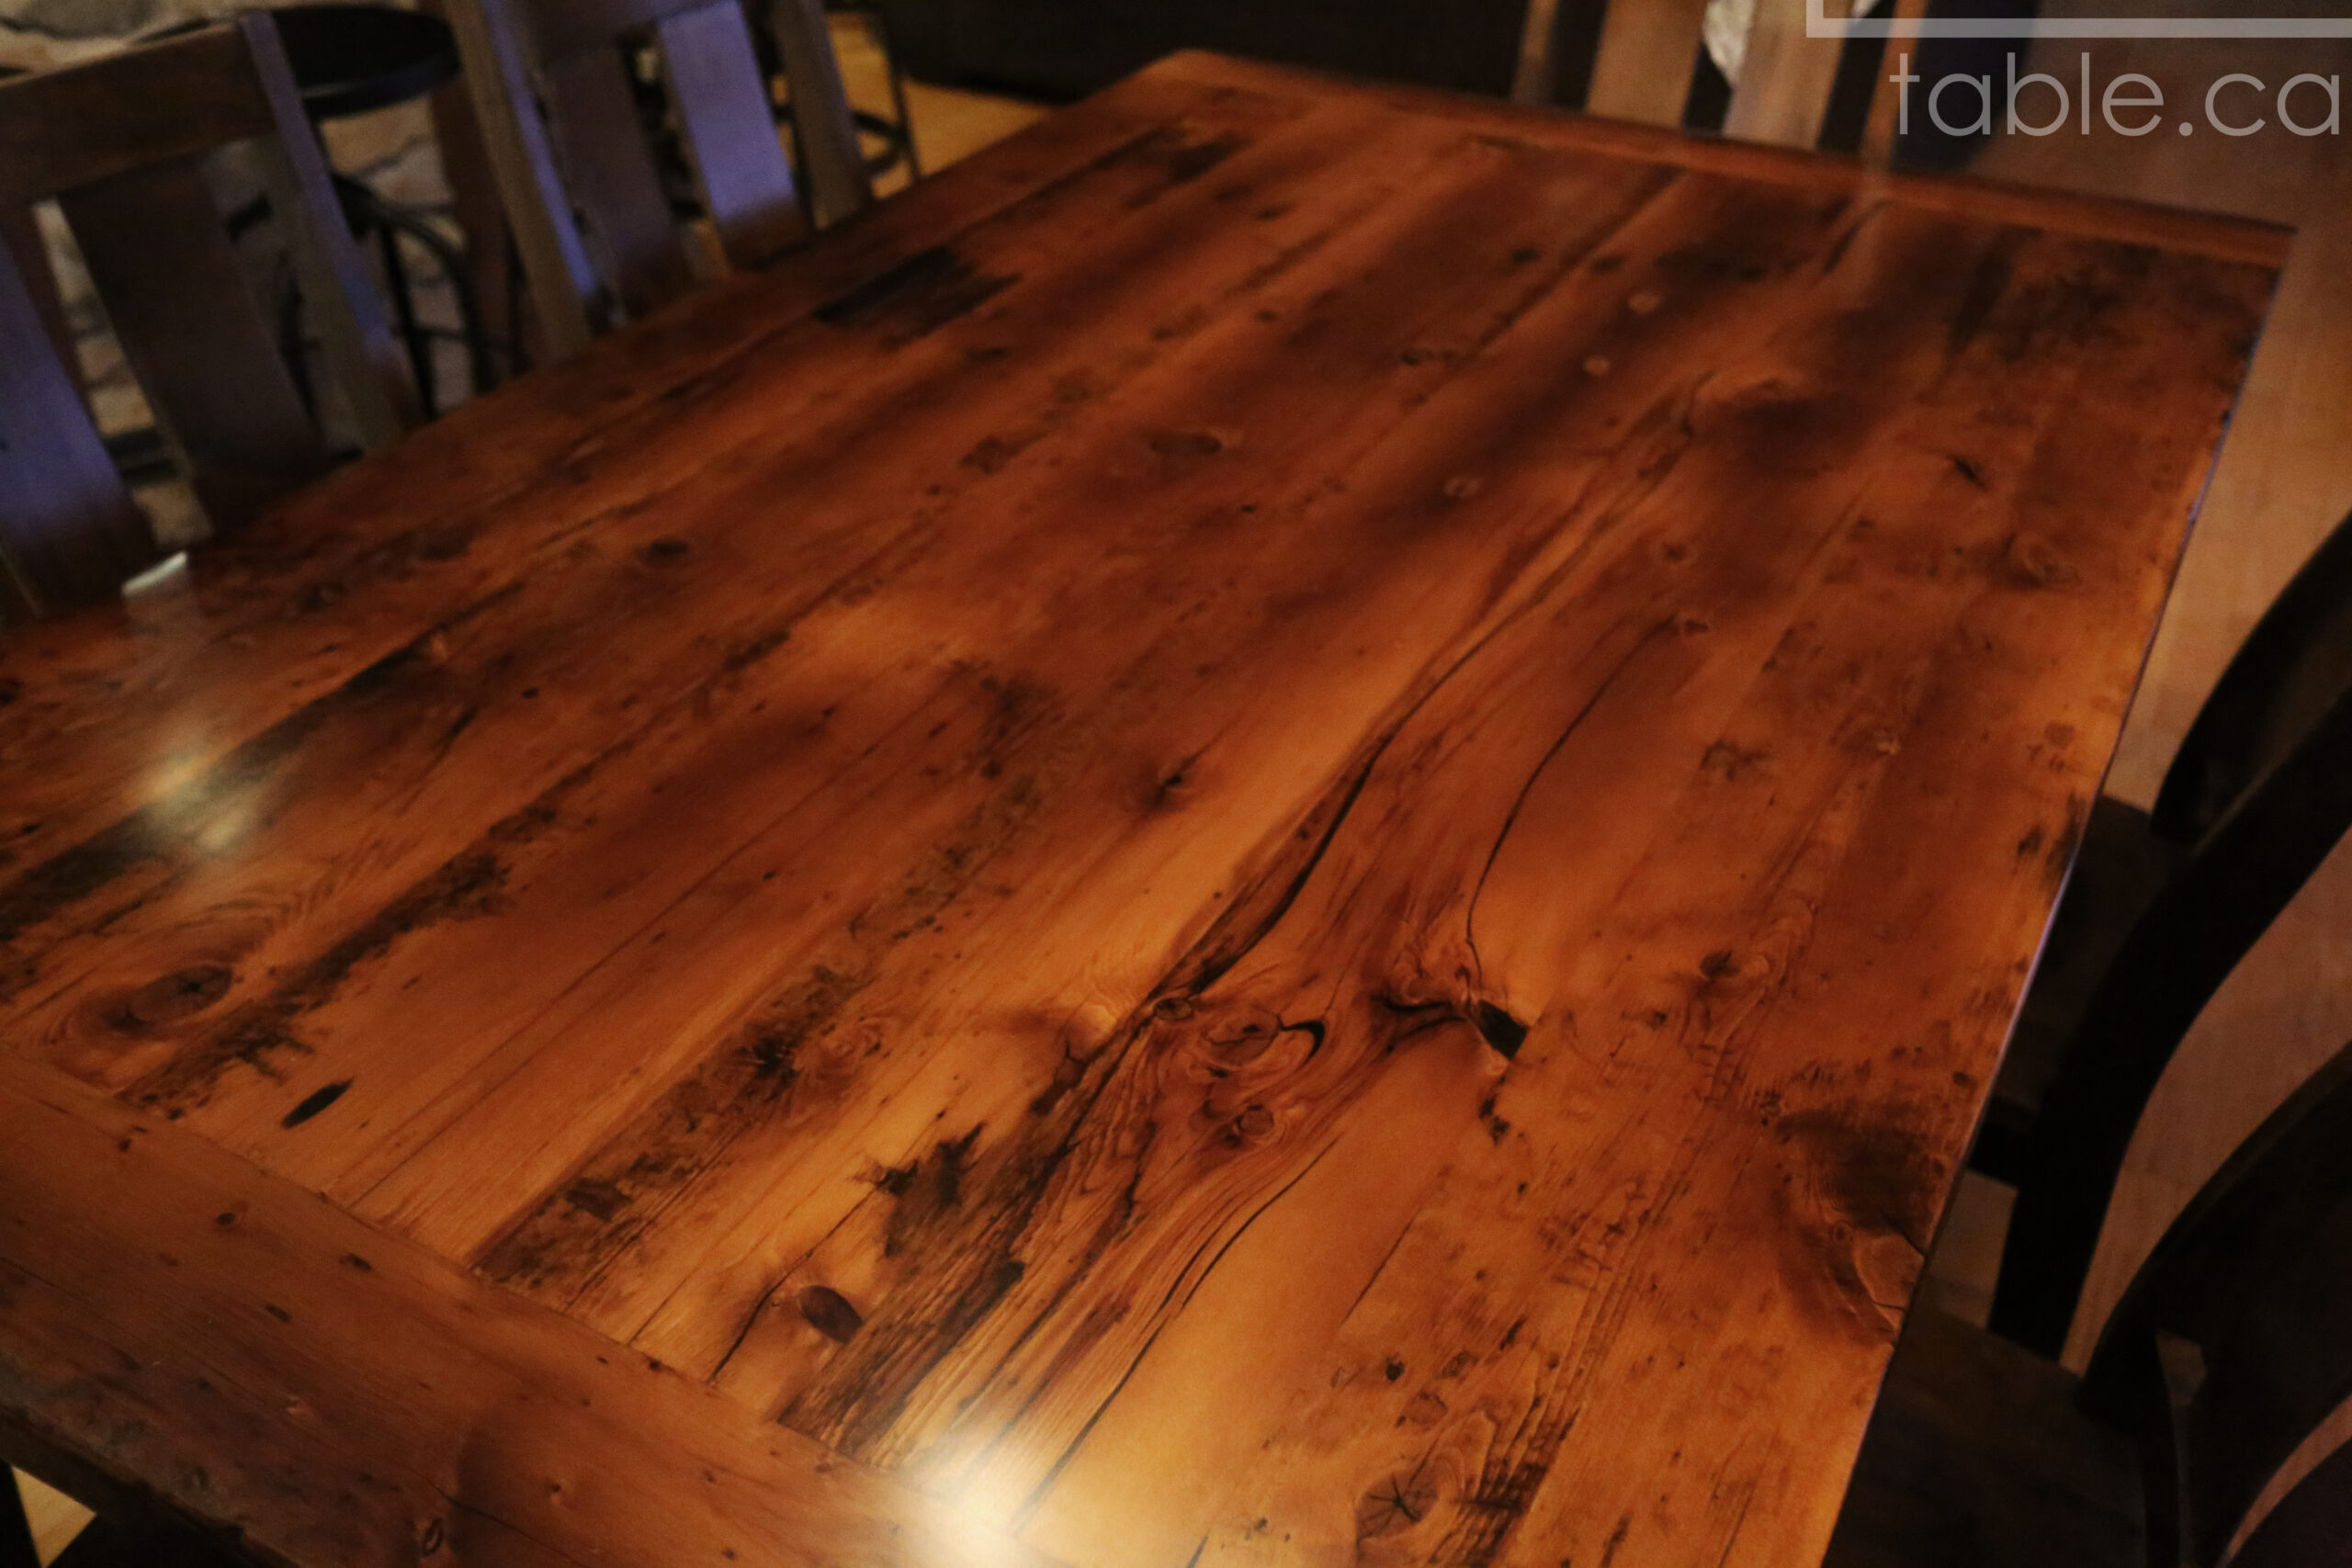 Project details: 70” Reclaimed Ontario Barnwood Table we made for a Sudbury, Ontario home - 42" wide – Harvest Base: Tapered [no notch] Windbrace Beam Legs - Old Growth Hemlock Threshing Floor Construction – Bread edge Ends - Original edges & distressing maintained - Premium epoxy + satin polyurethane finish – One 18” Leaf Extension – 6 Eastbrook Chairs / Wormy Maple / Polyurethane clearcoat finish - www.table.ca